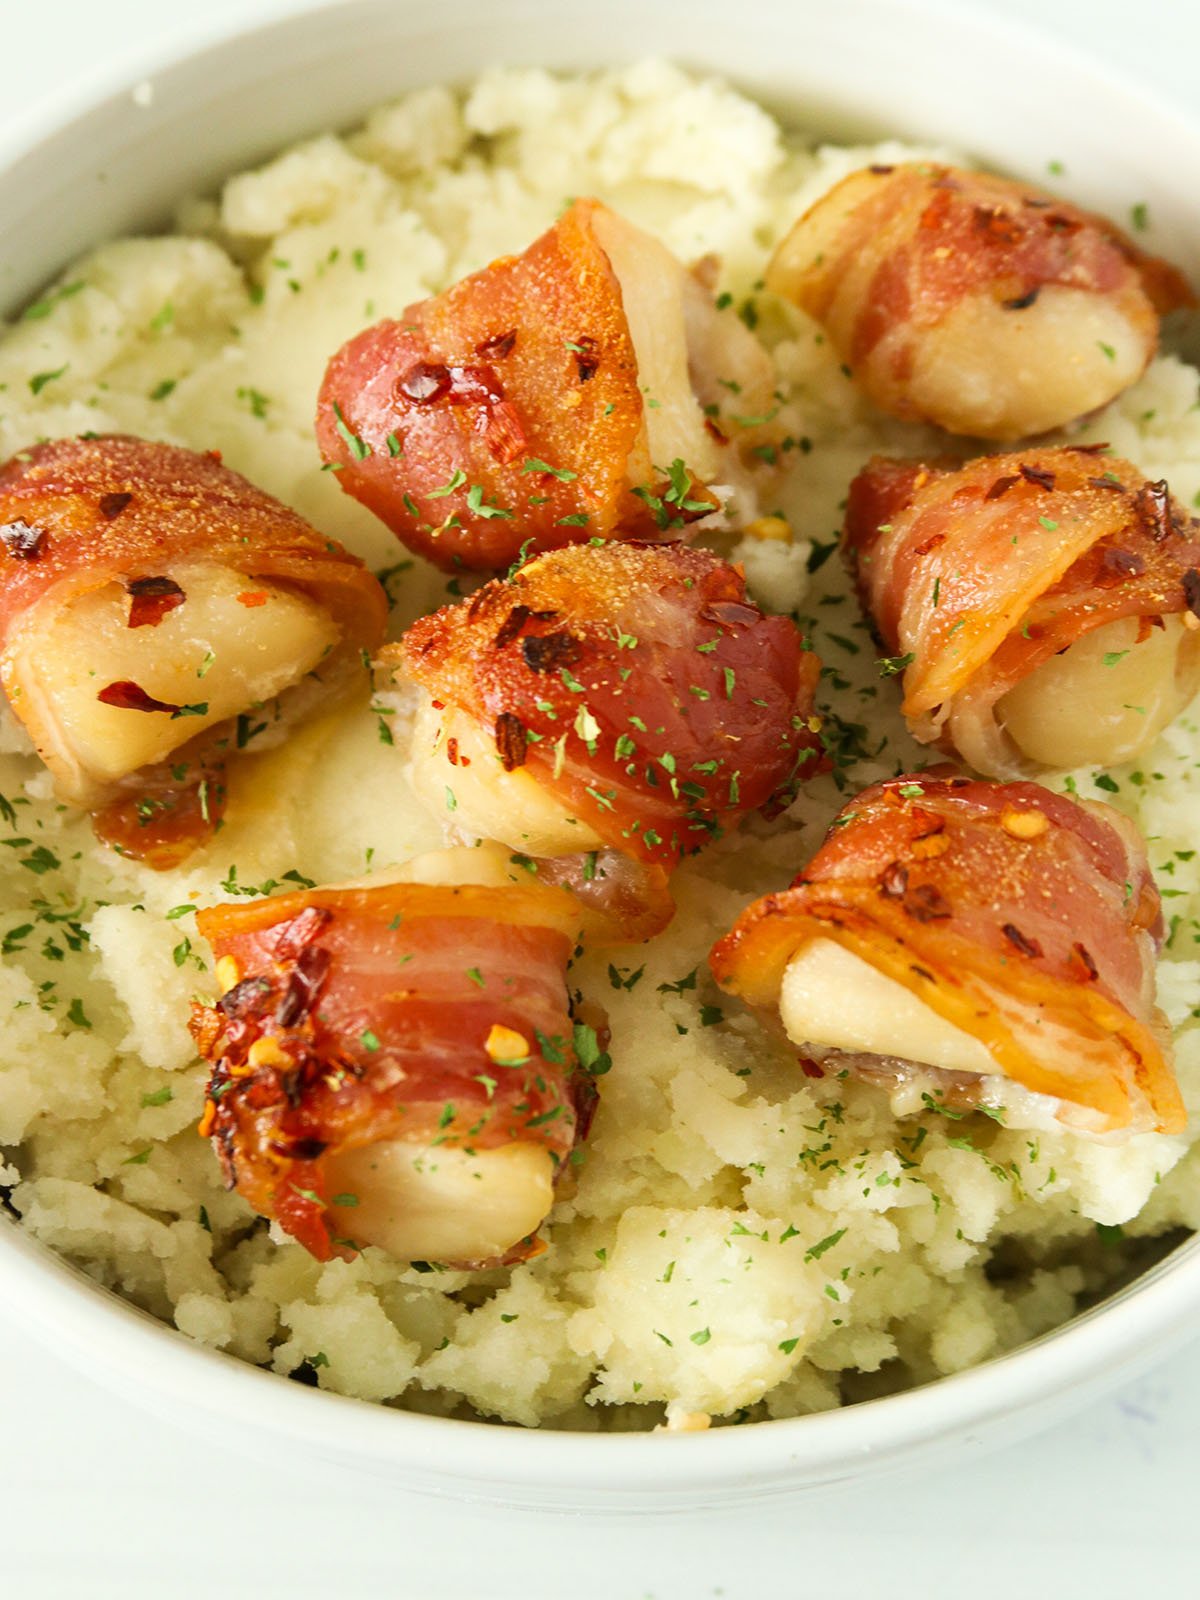 Pancetta-wrapped Scallops over mashed potatoes in a white bowl